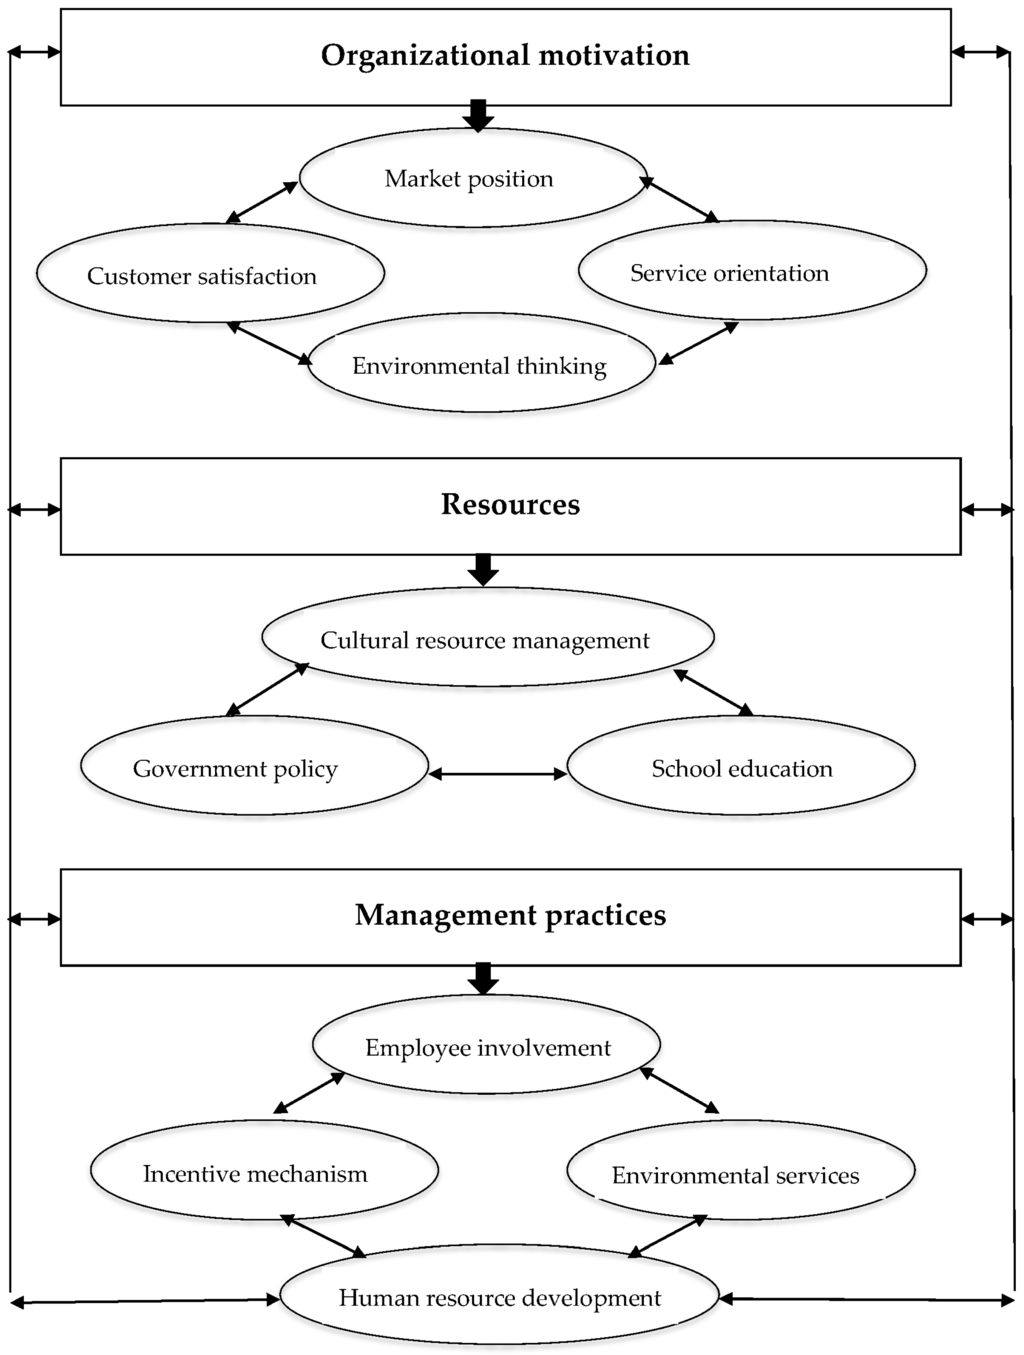 https://pub.mdpi-res.com/sustainability/sustainability-08-00223/article_deploy/html/images/sustainability-08-00223-g001-1024.png?1459406304